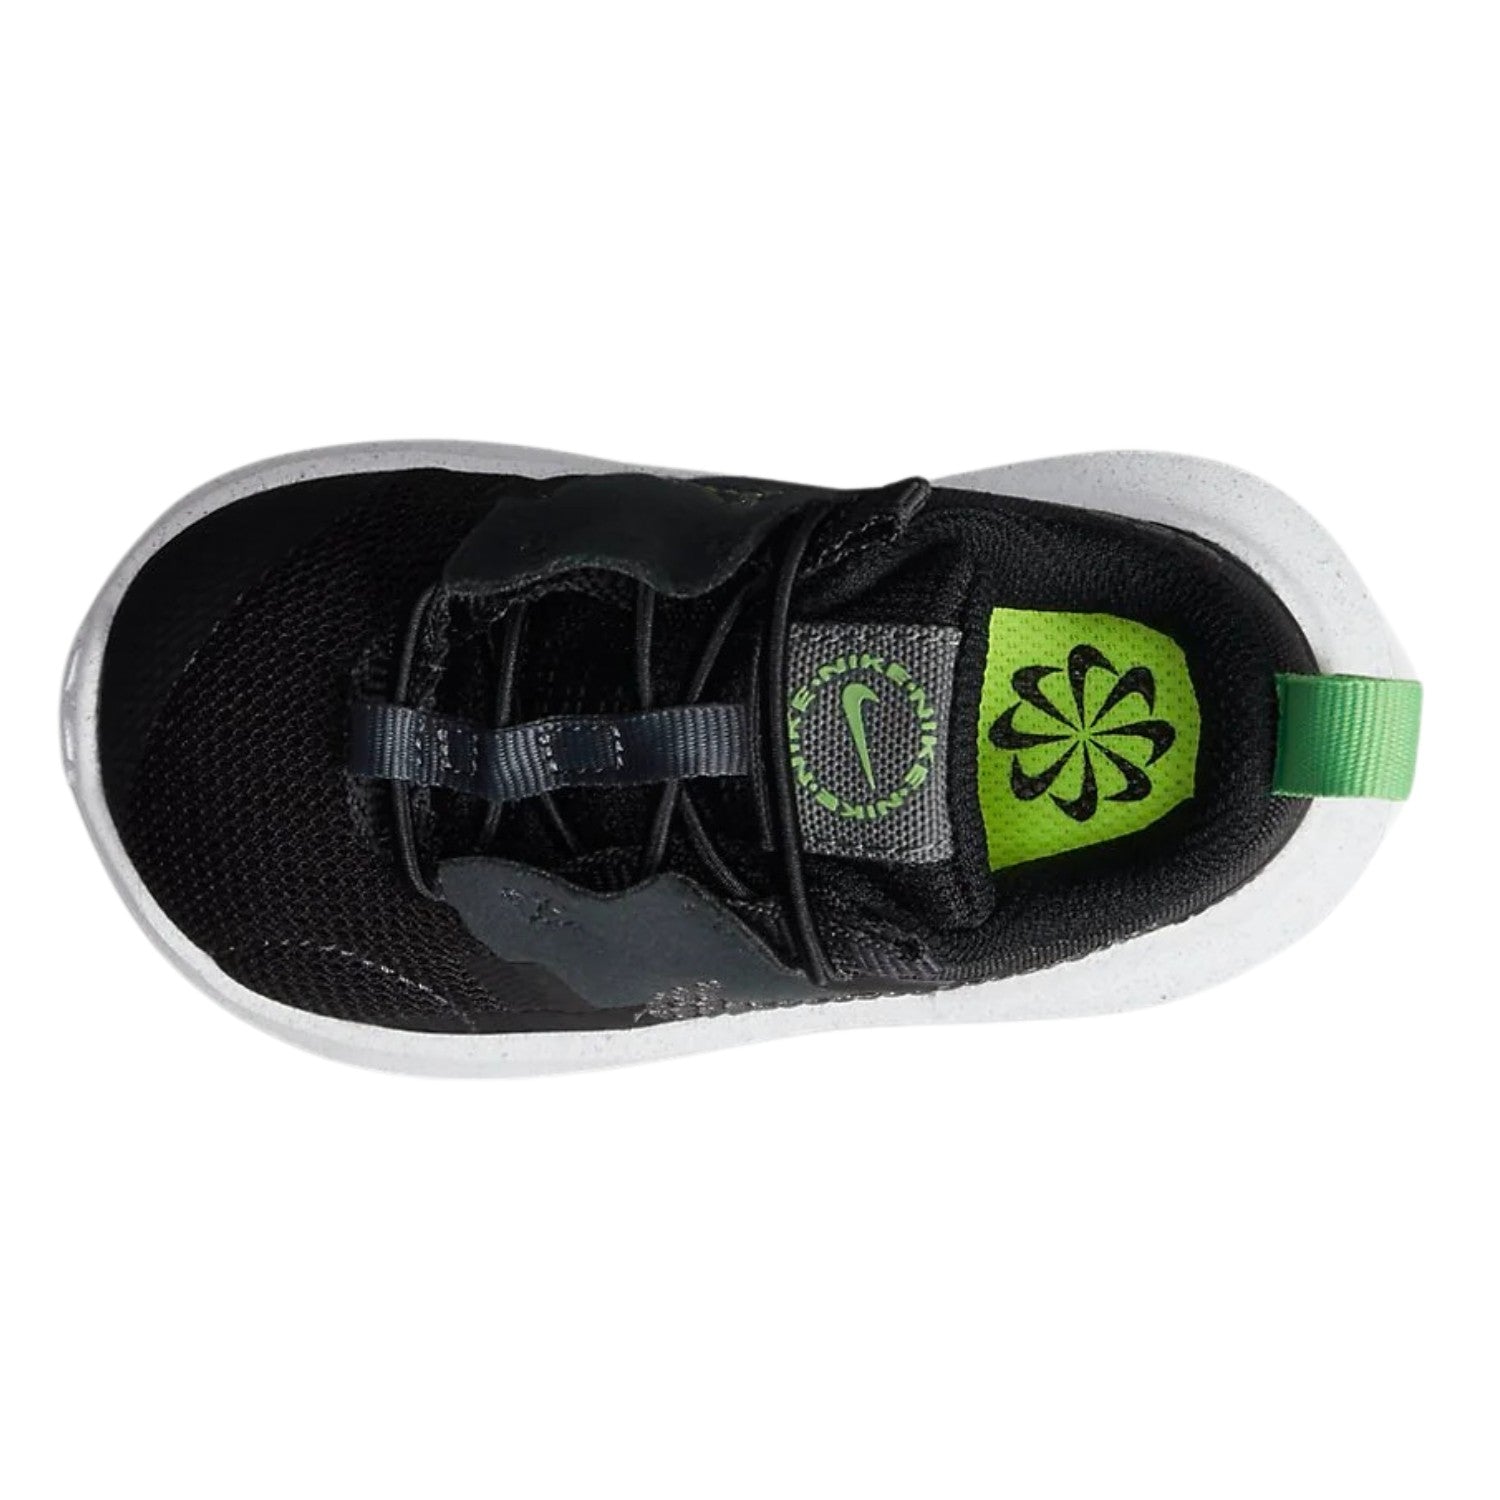 Nike Crater Impact (Td) Toddlers Style : Db3553